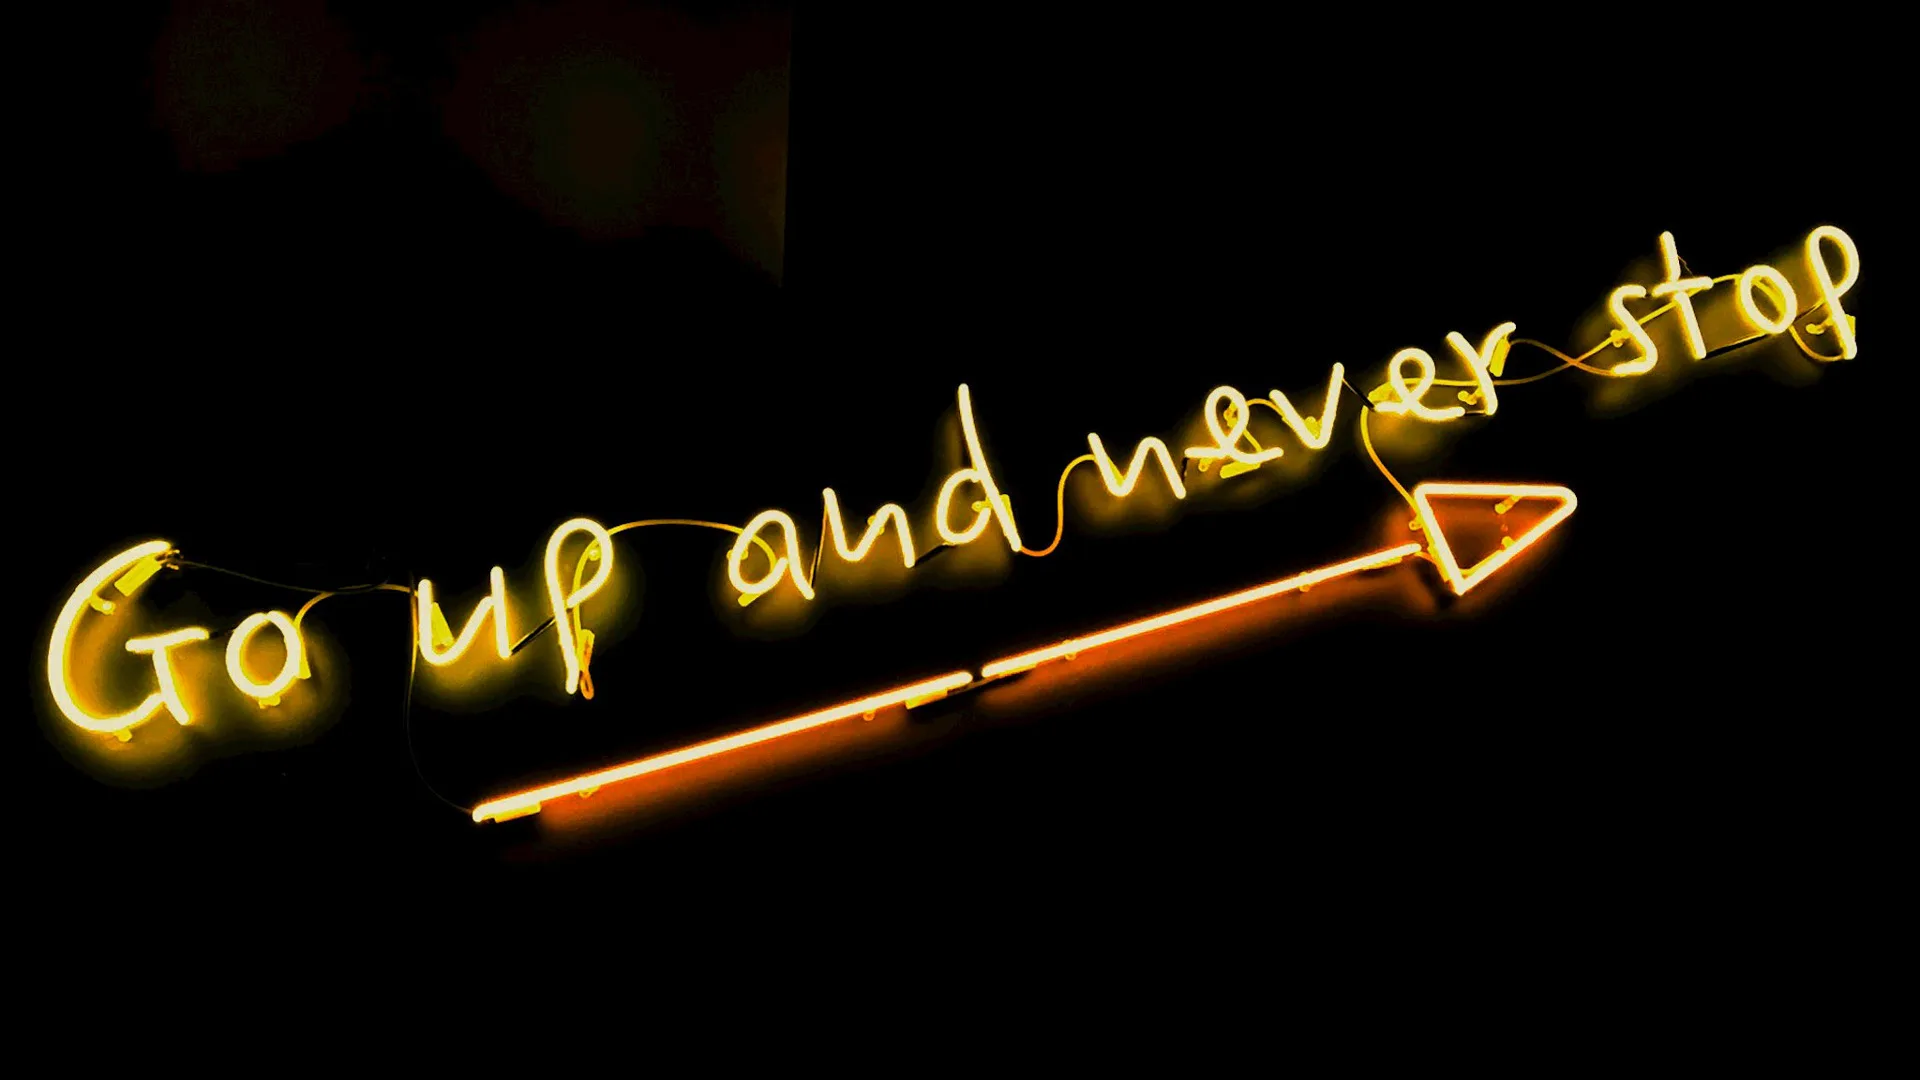 A yellow neon sign that says "Go up and never stop" with an arrow pointing to the right below it against a black background